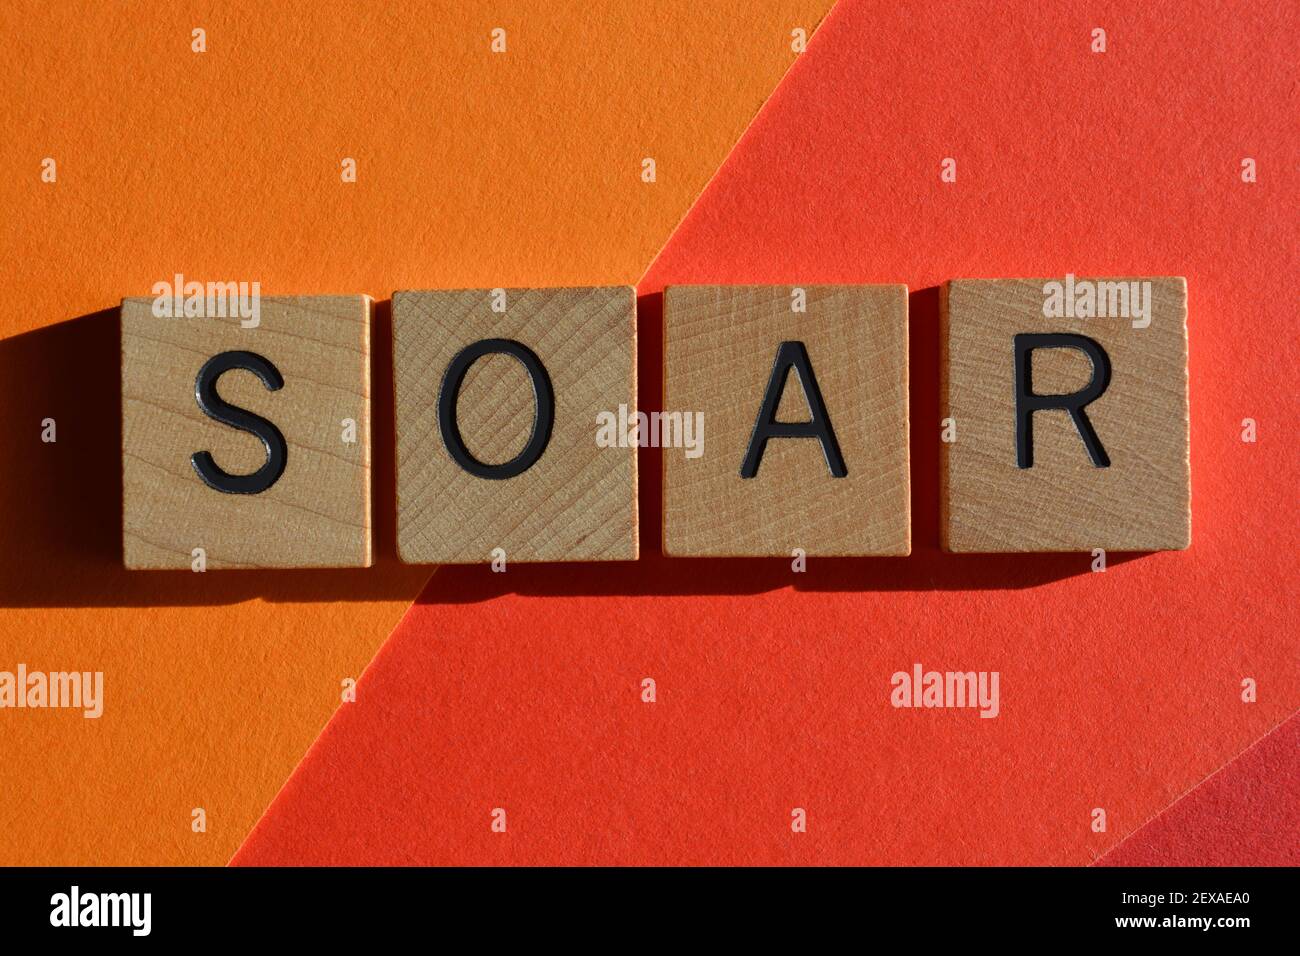 soar, acronym for Strengths, Opportunities, Aspirations, Results, a strategic planning method Stock Photo